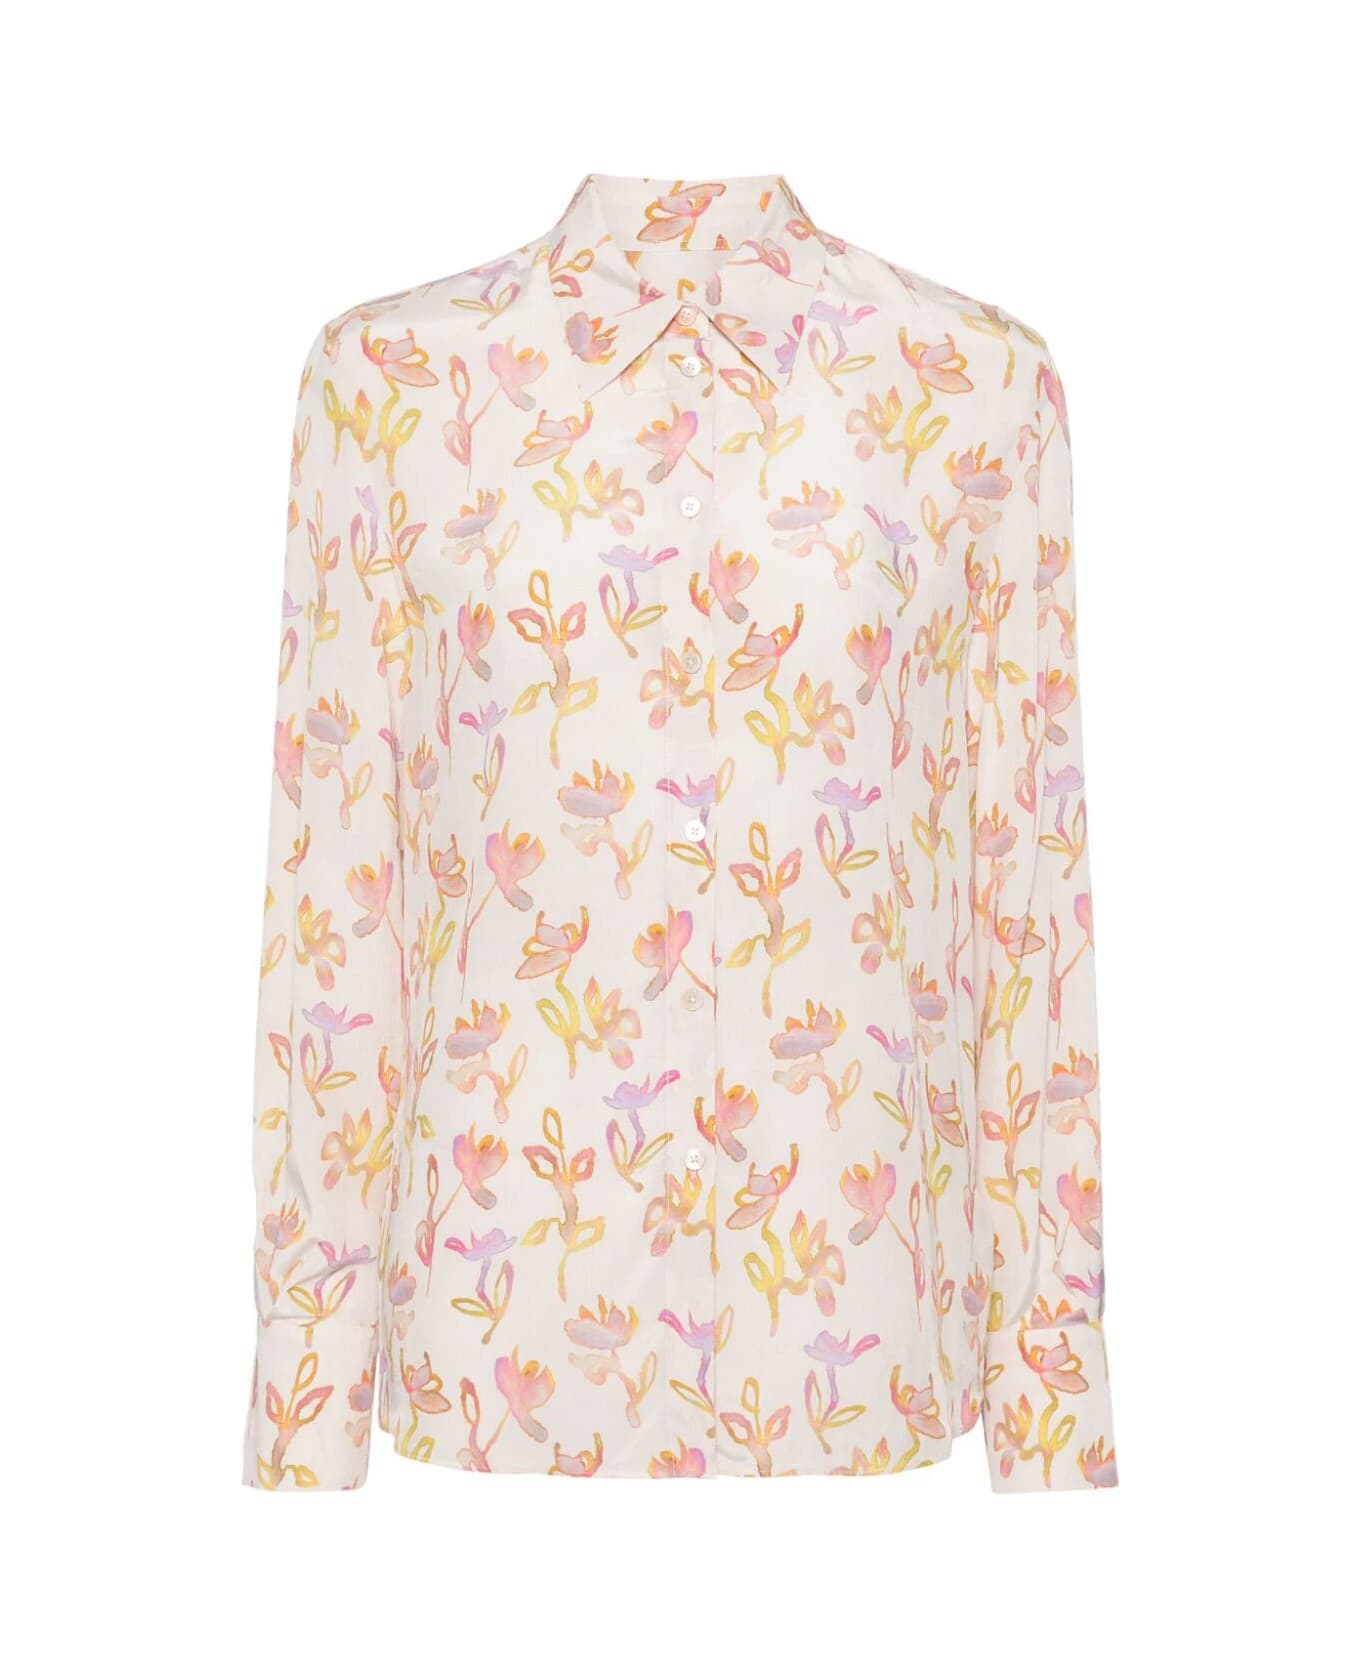 PS by Paul Smith Printed Shirt - White